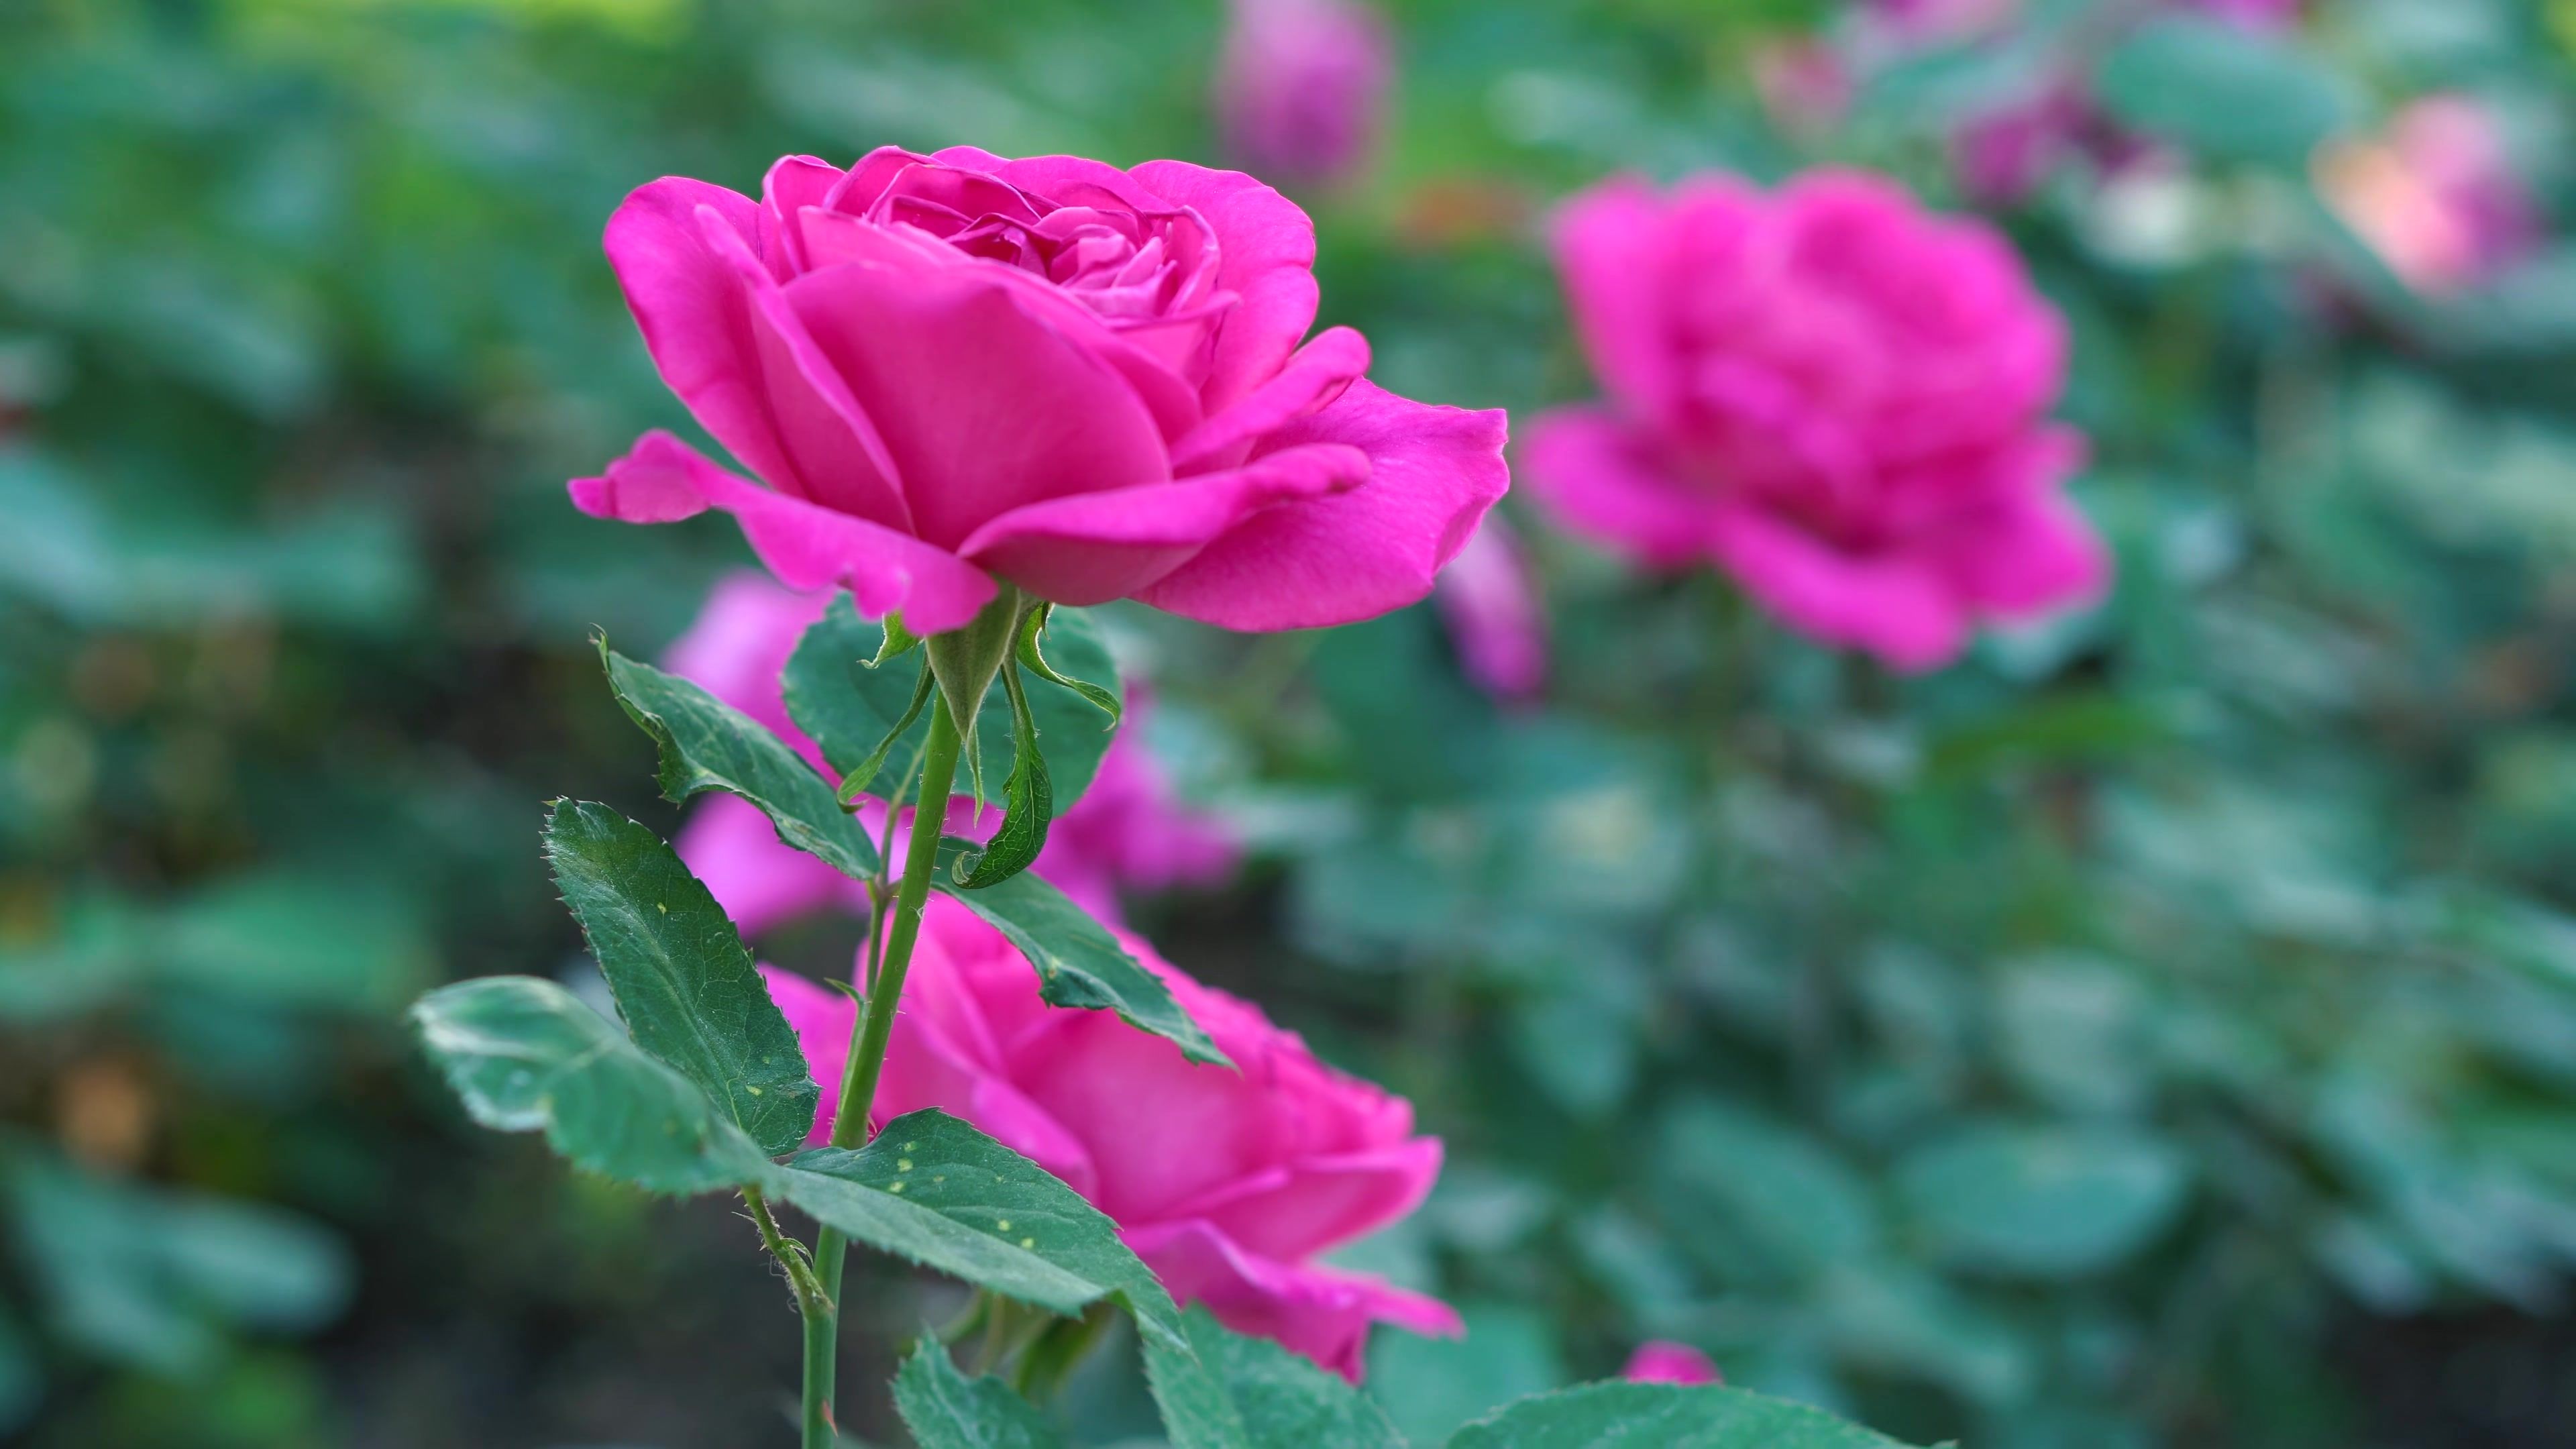 Pink Rose Flower 4K Ultra HD Wallpaper, Photo, Picture or Image